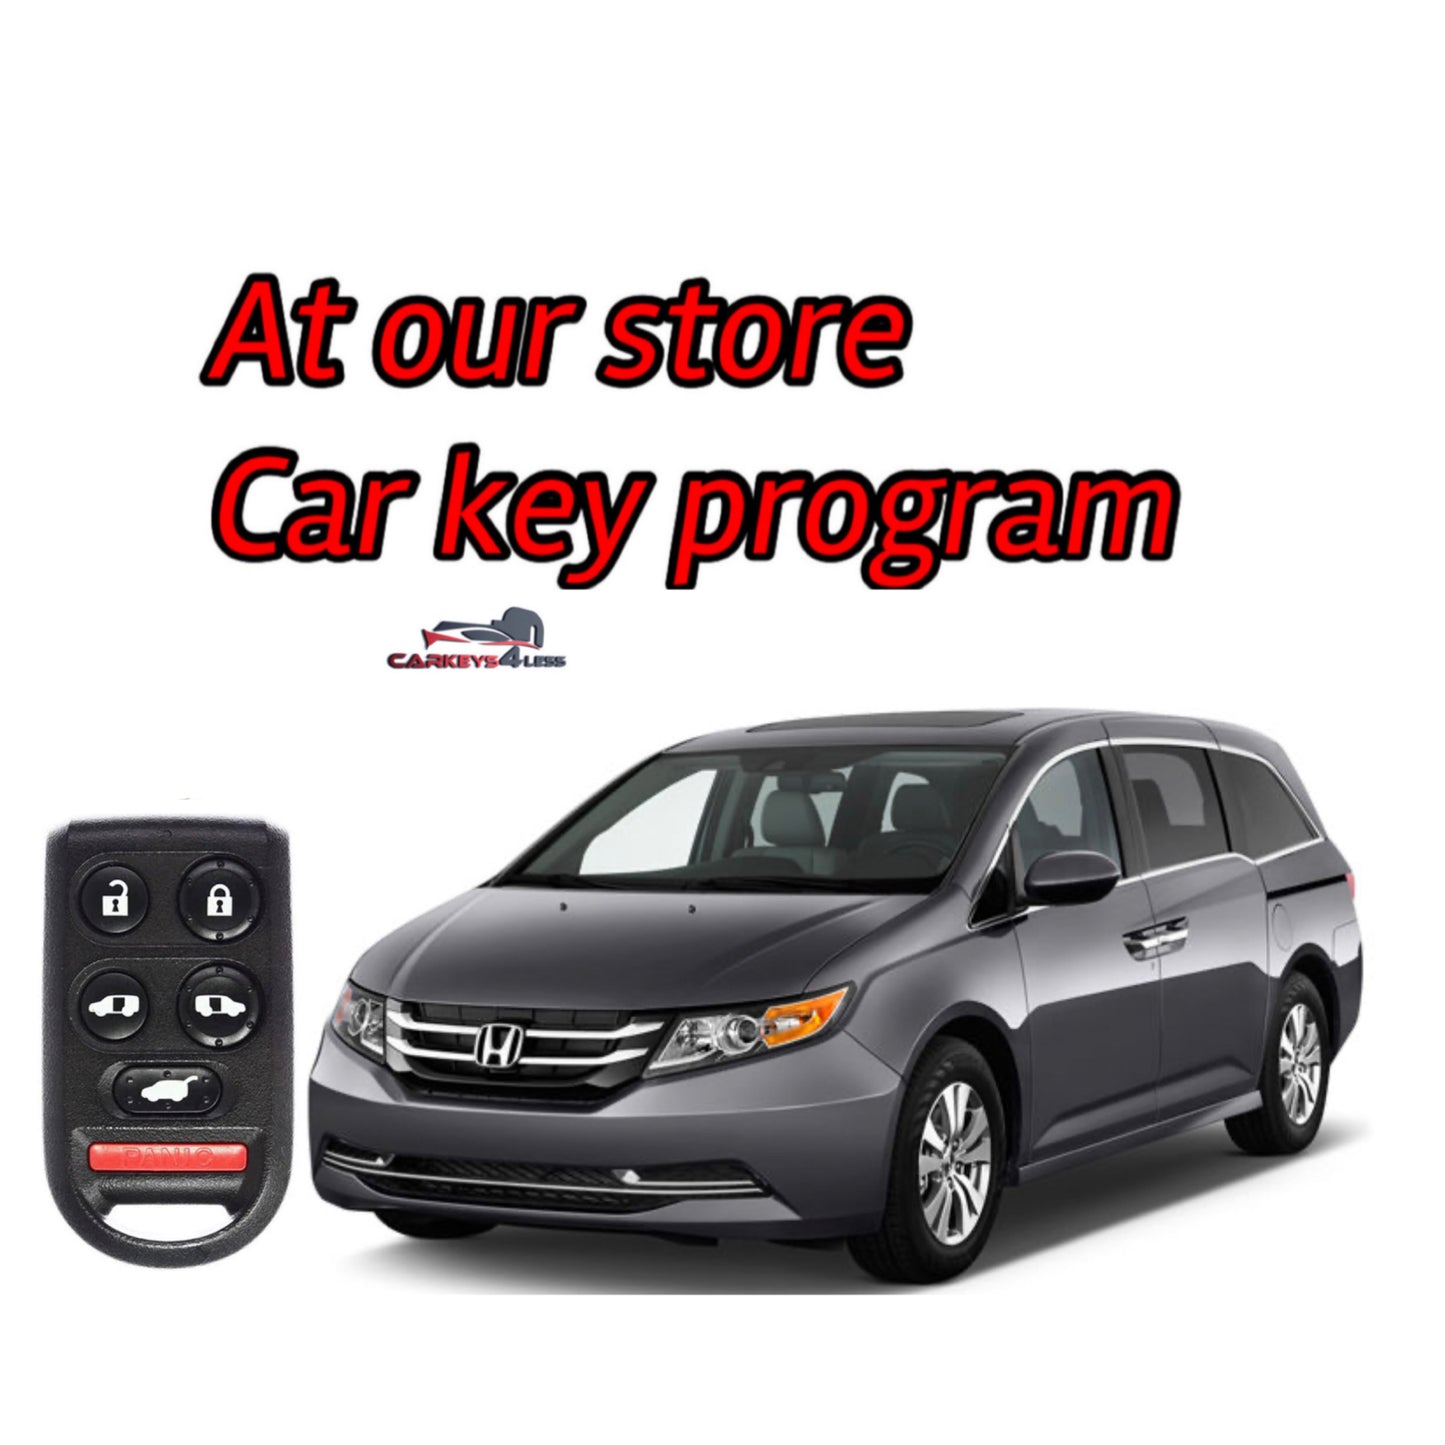 At our store aftermarket key fob program for honda